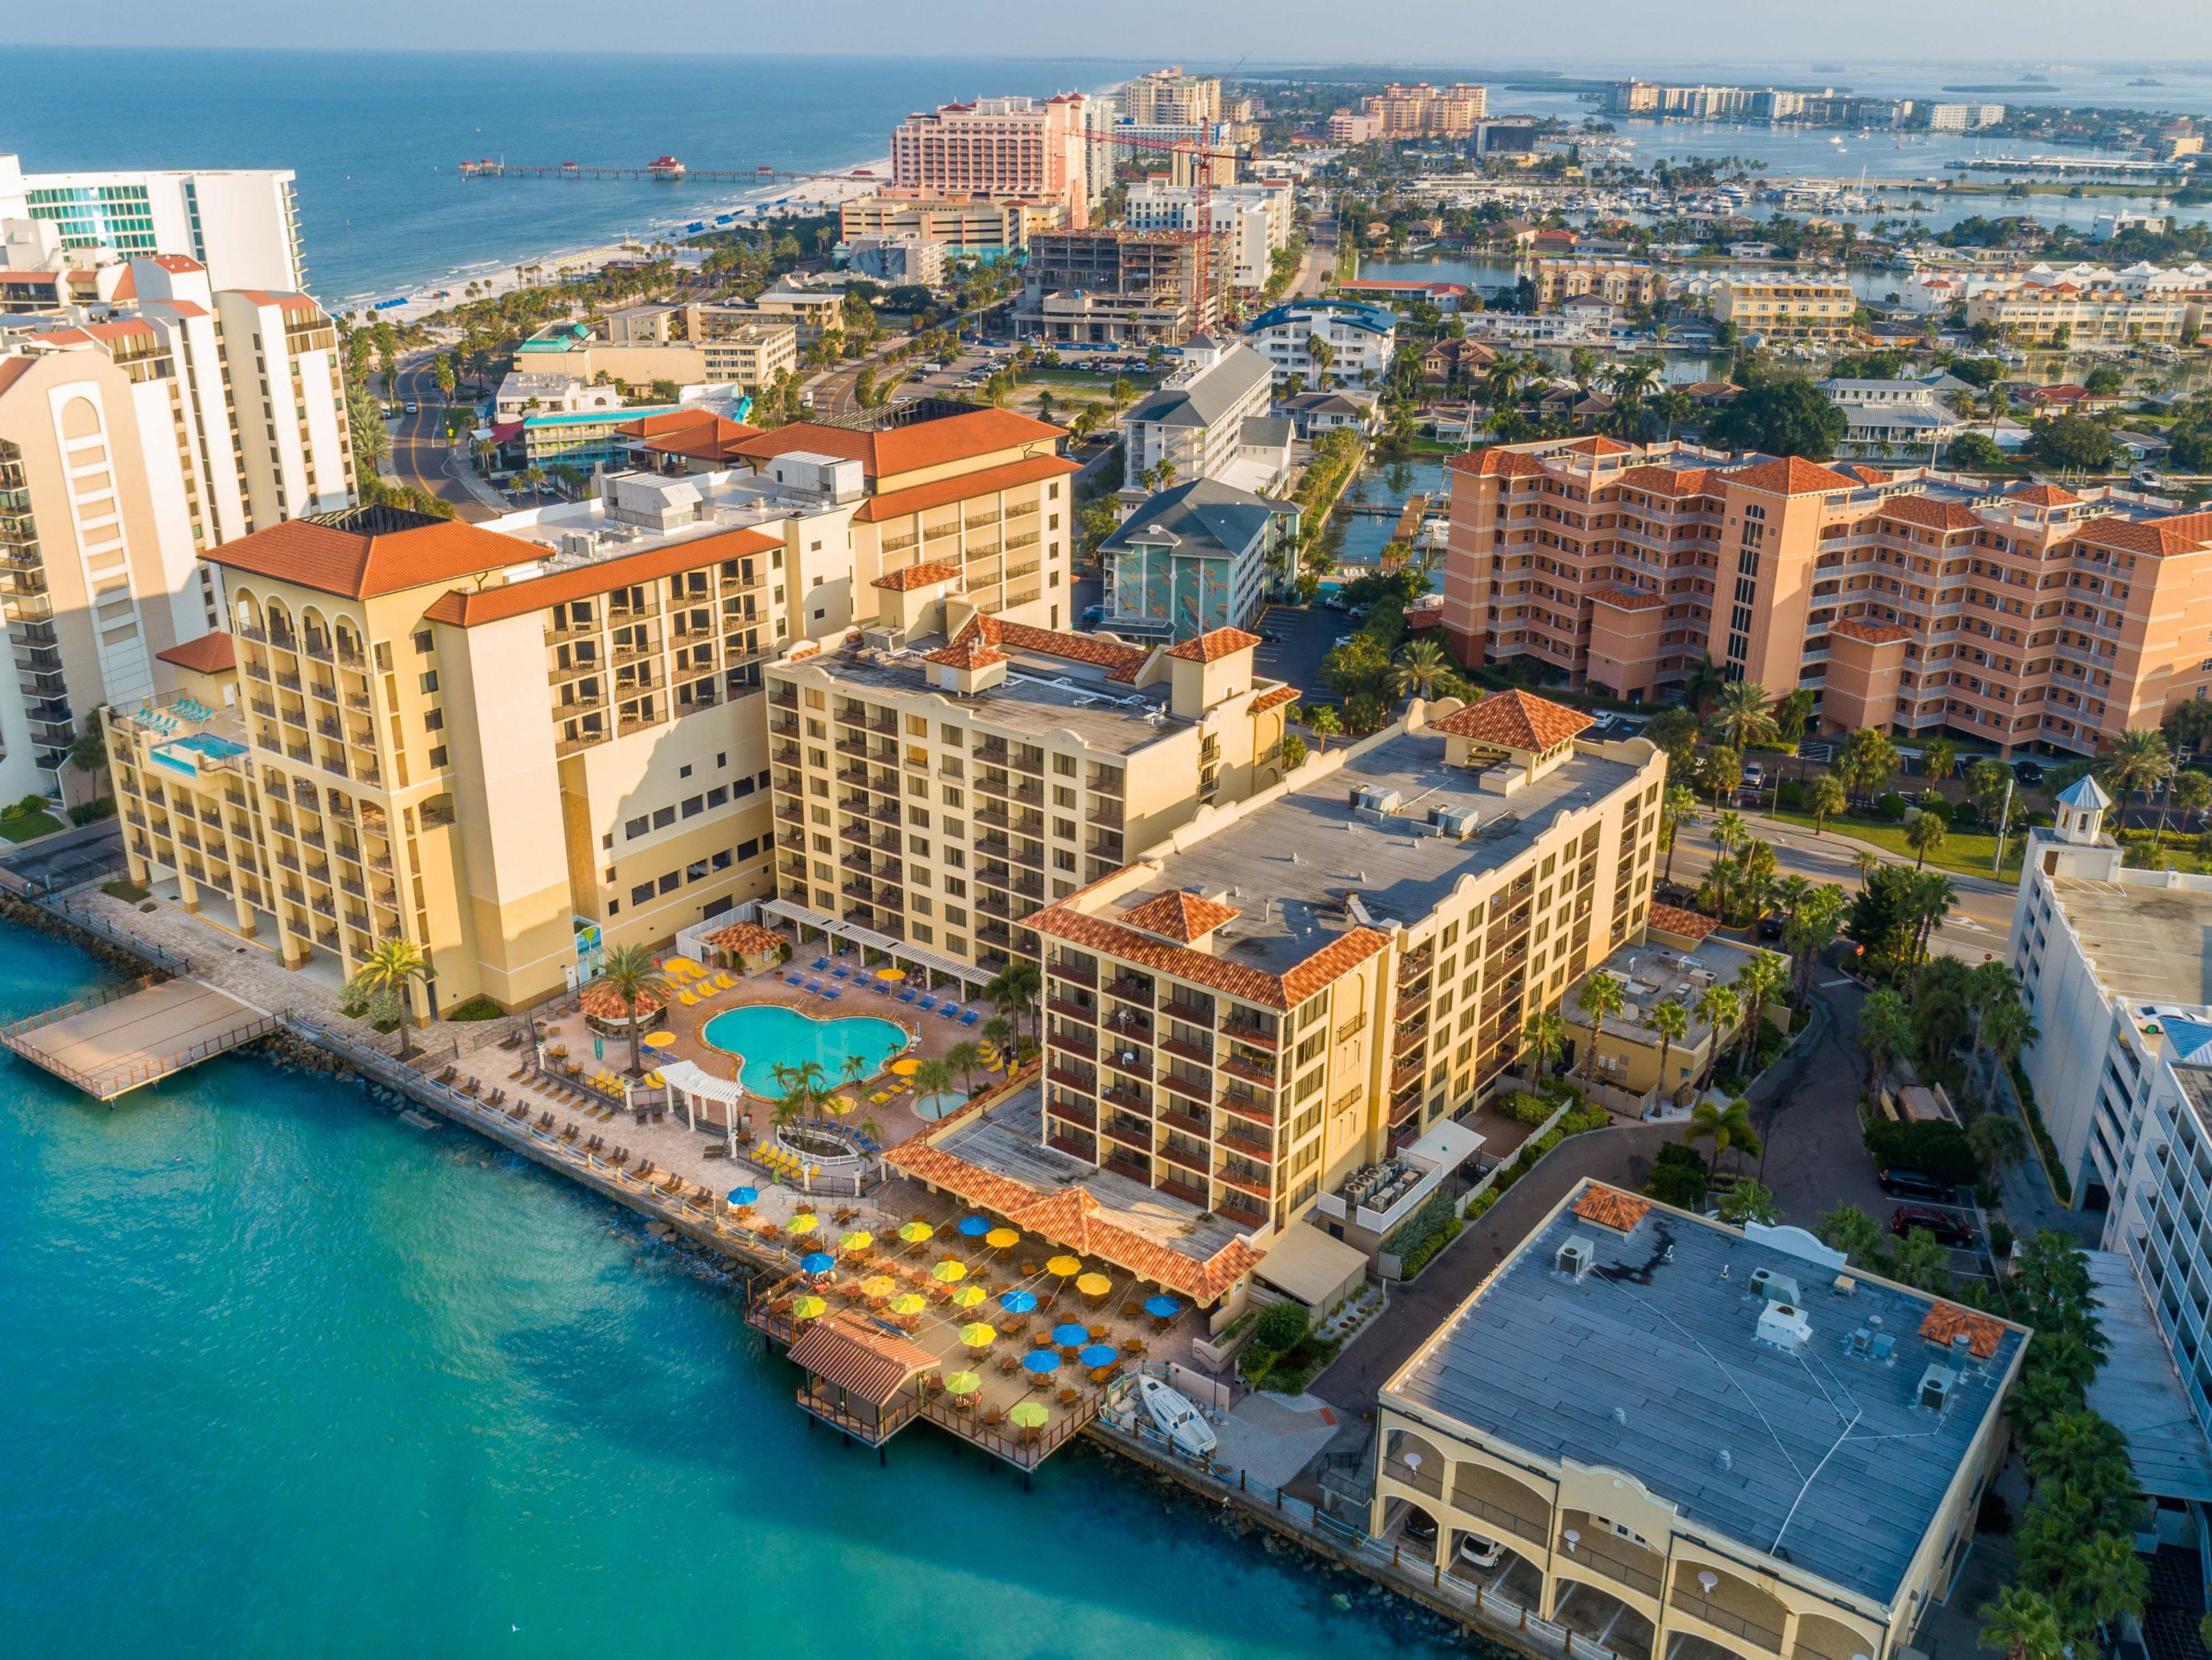 Clearwater Hotels | Top 29 Hotels in Clearwater, FL by IHG